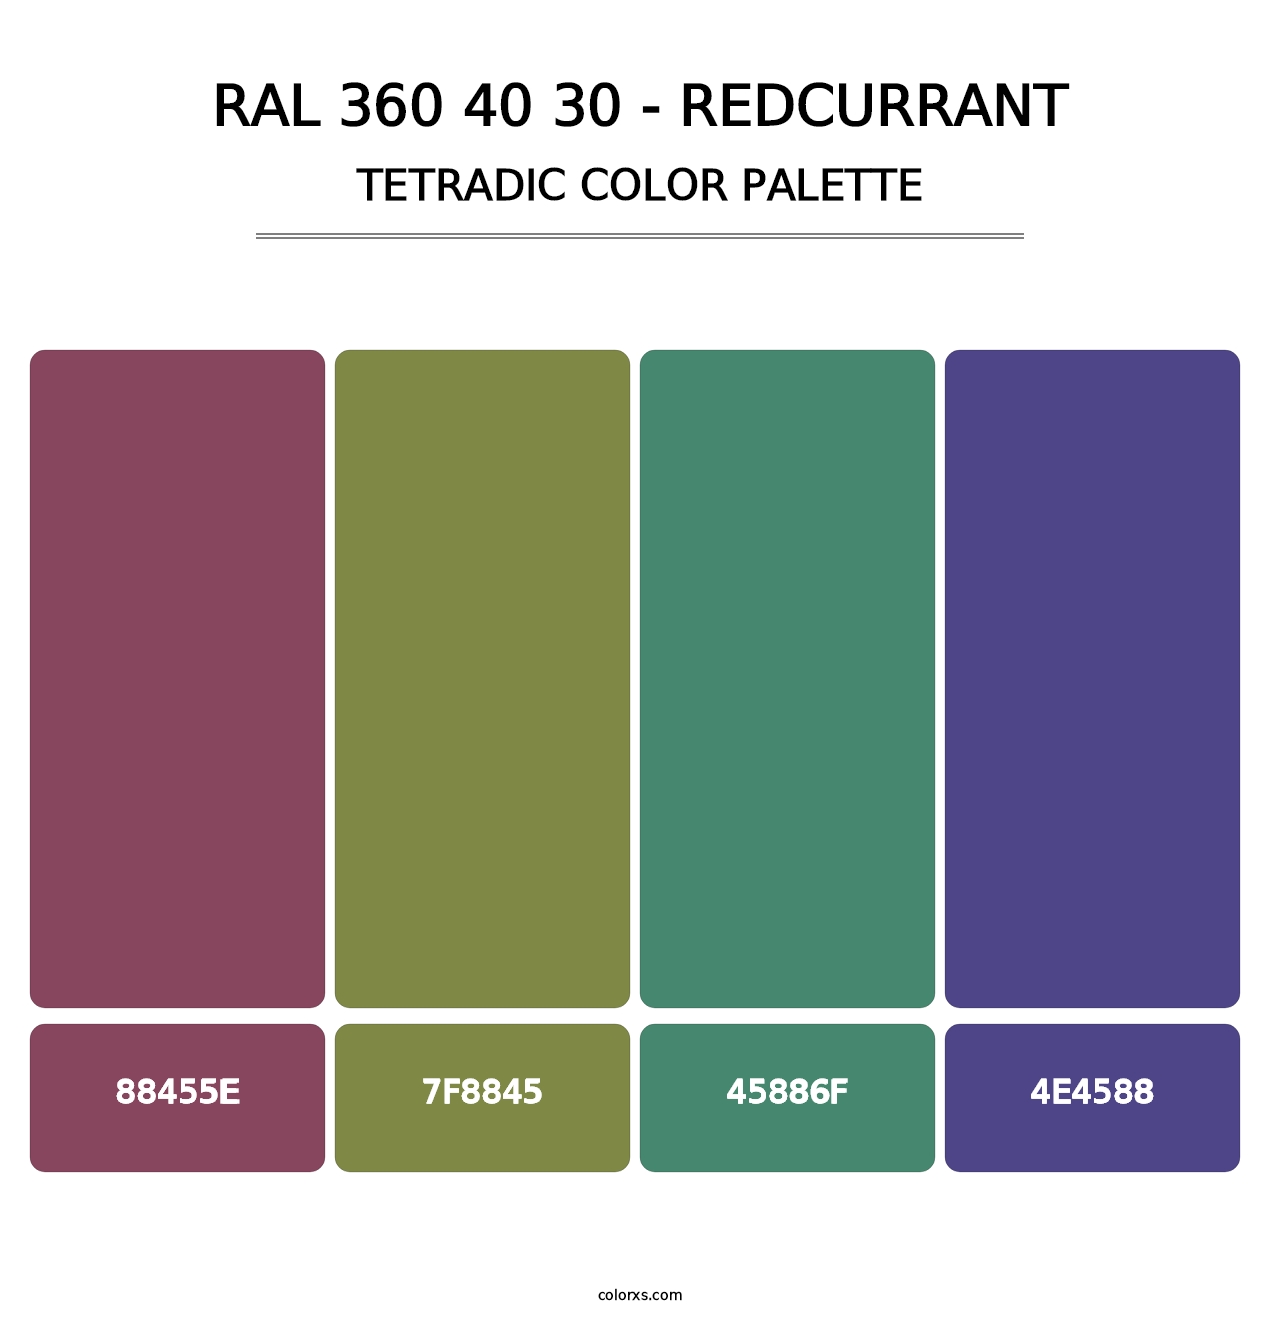 RAL 360 40 30 - Redcurrant - Tetradic Color Palette